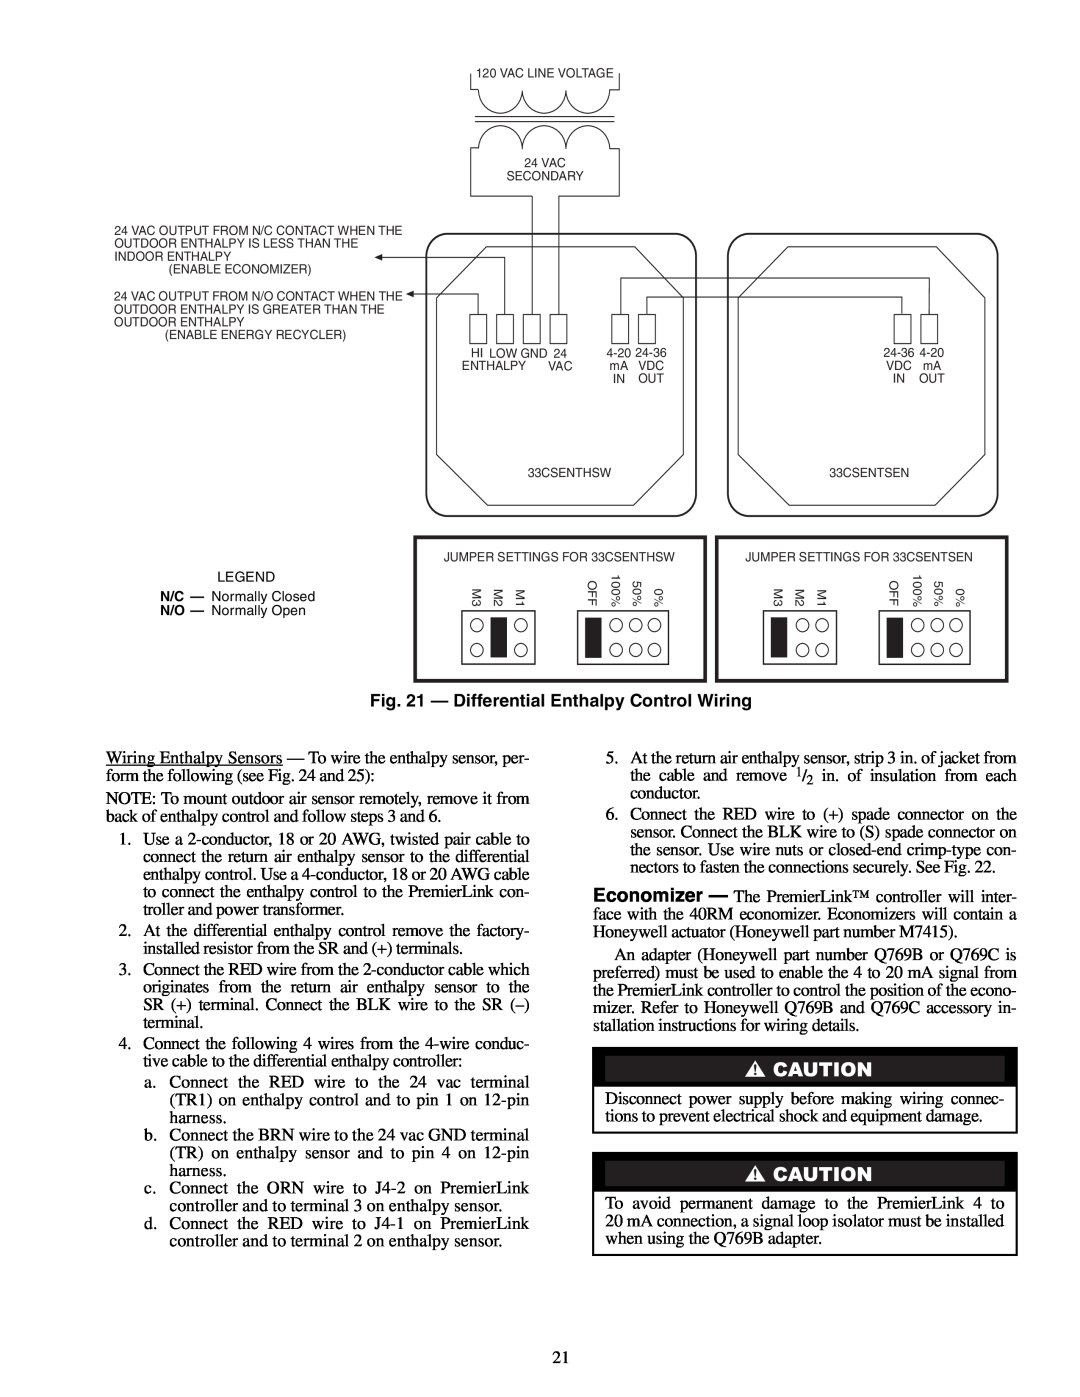 Carrier 33CSPREMLK specifications Differential Enthalpy Control Wiring 